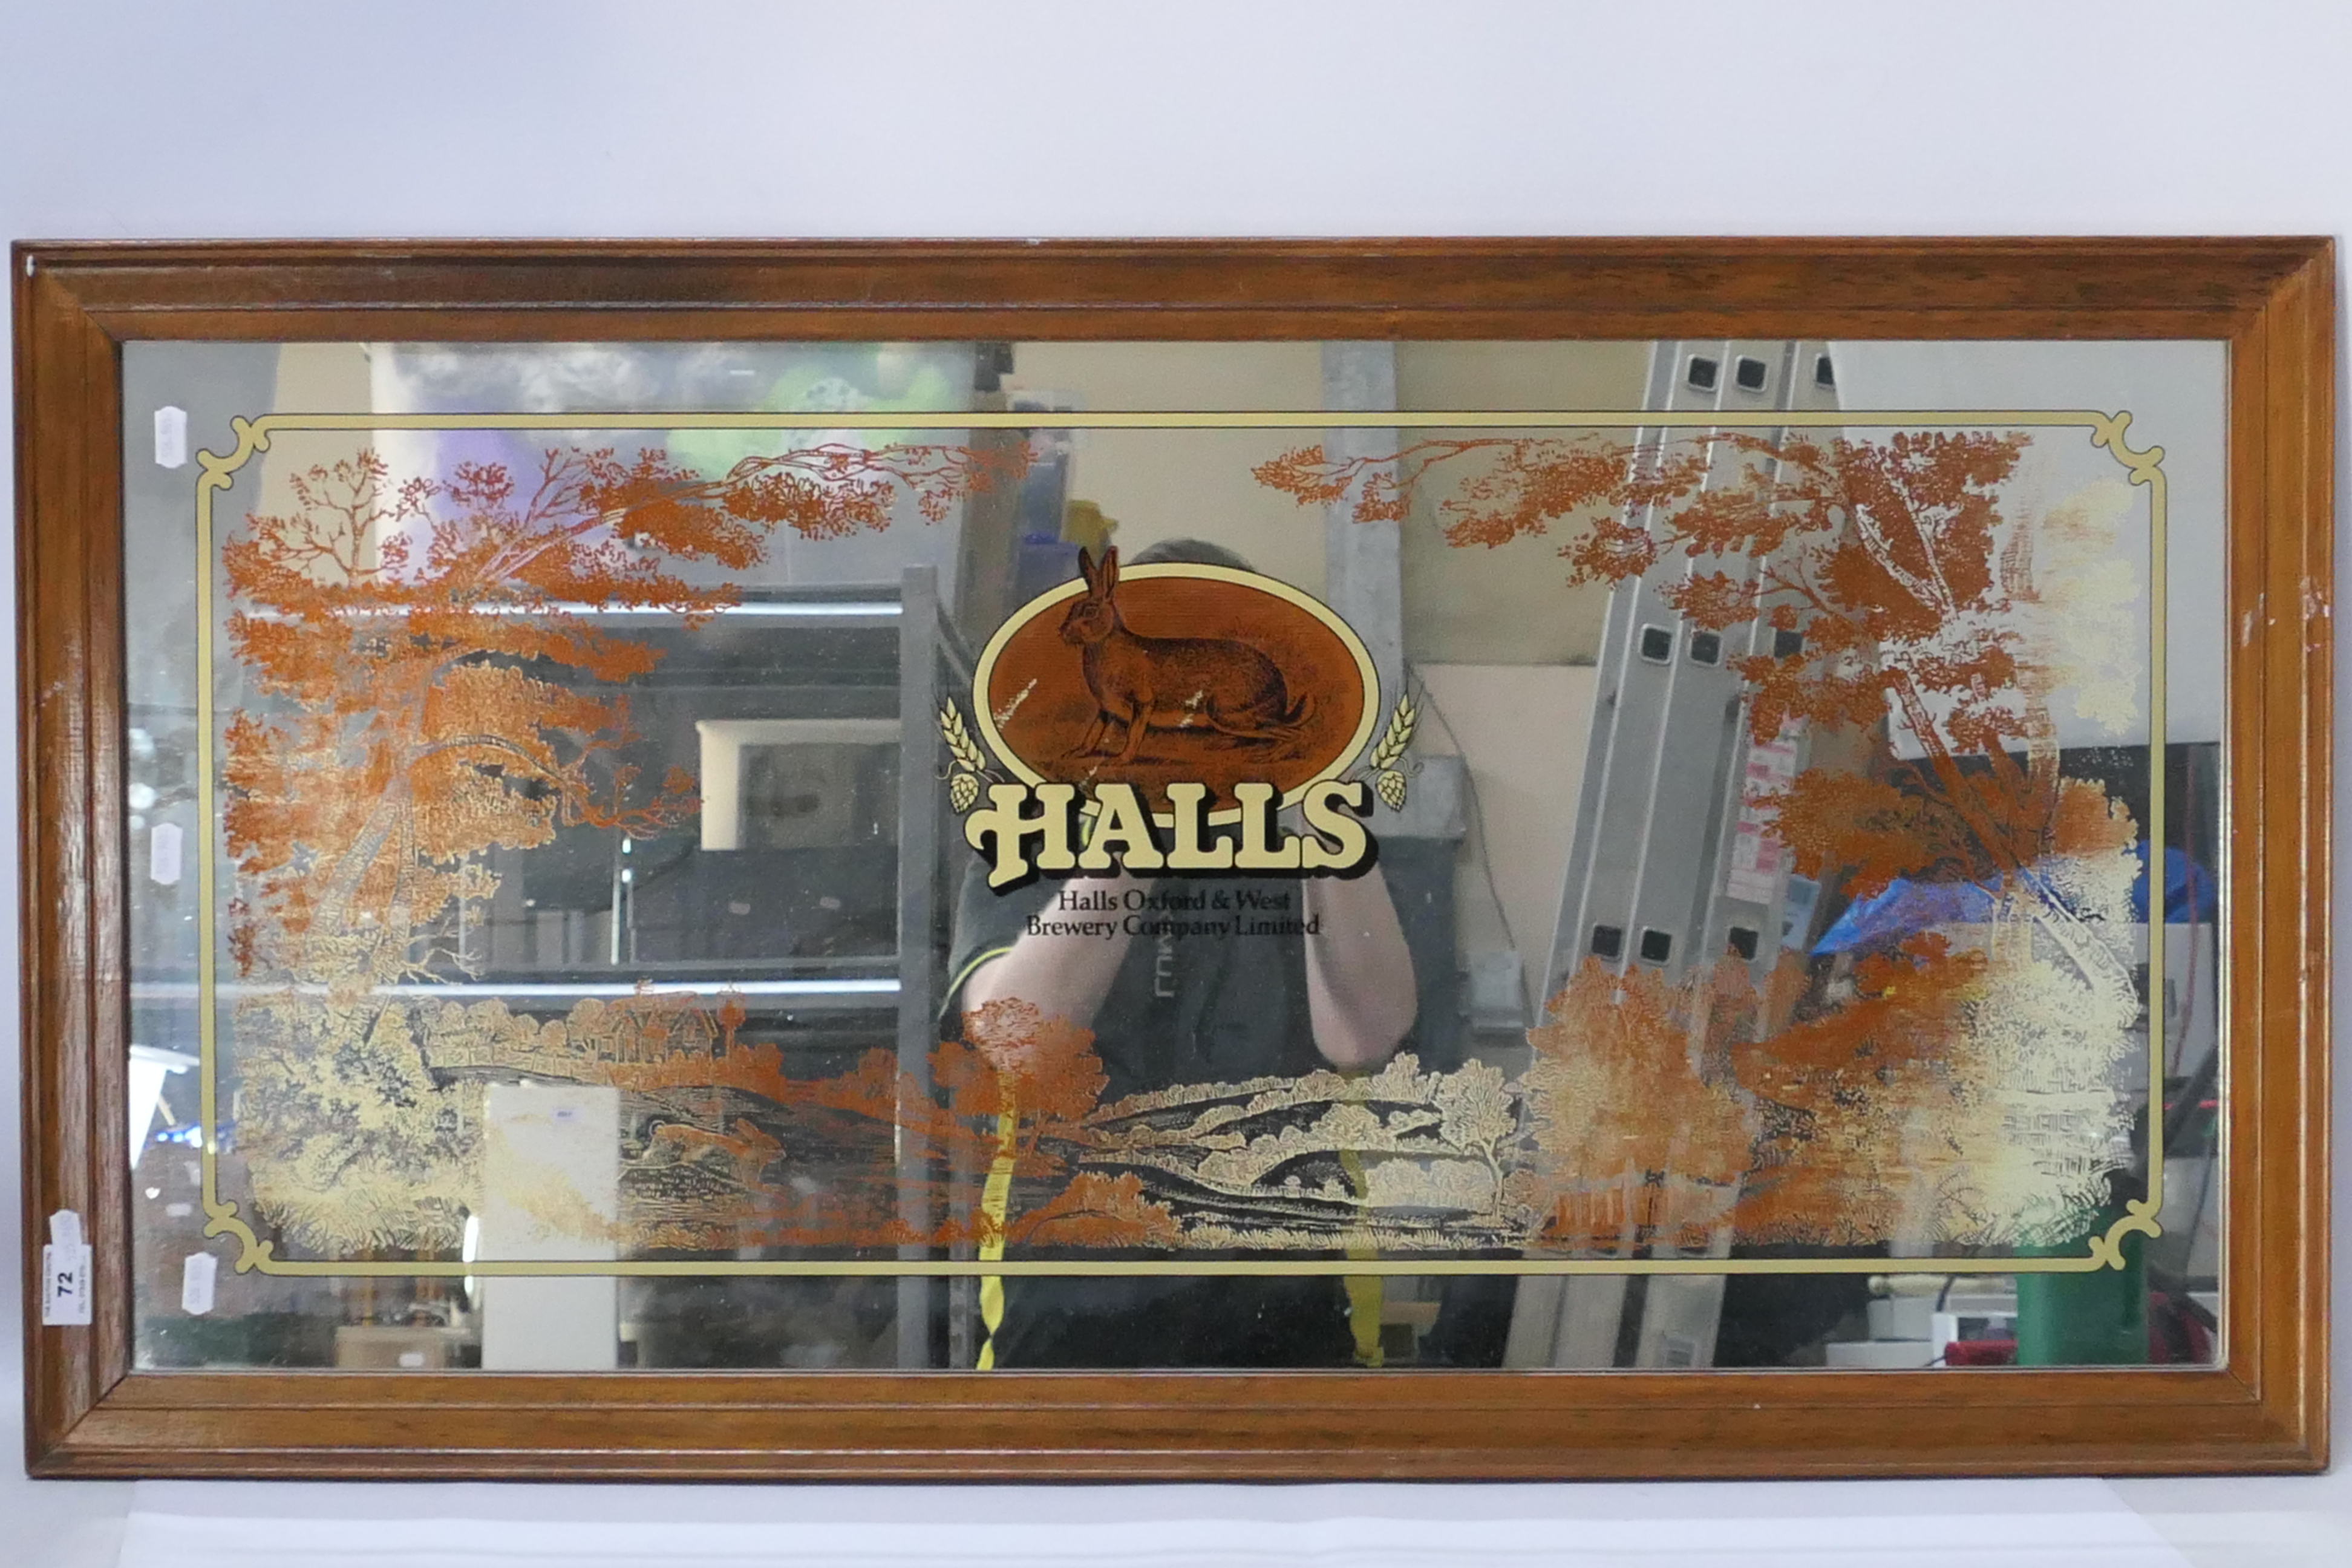 A Halls Oxford & West Brewery Company Limited advertising mirror,